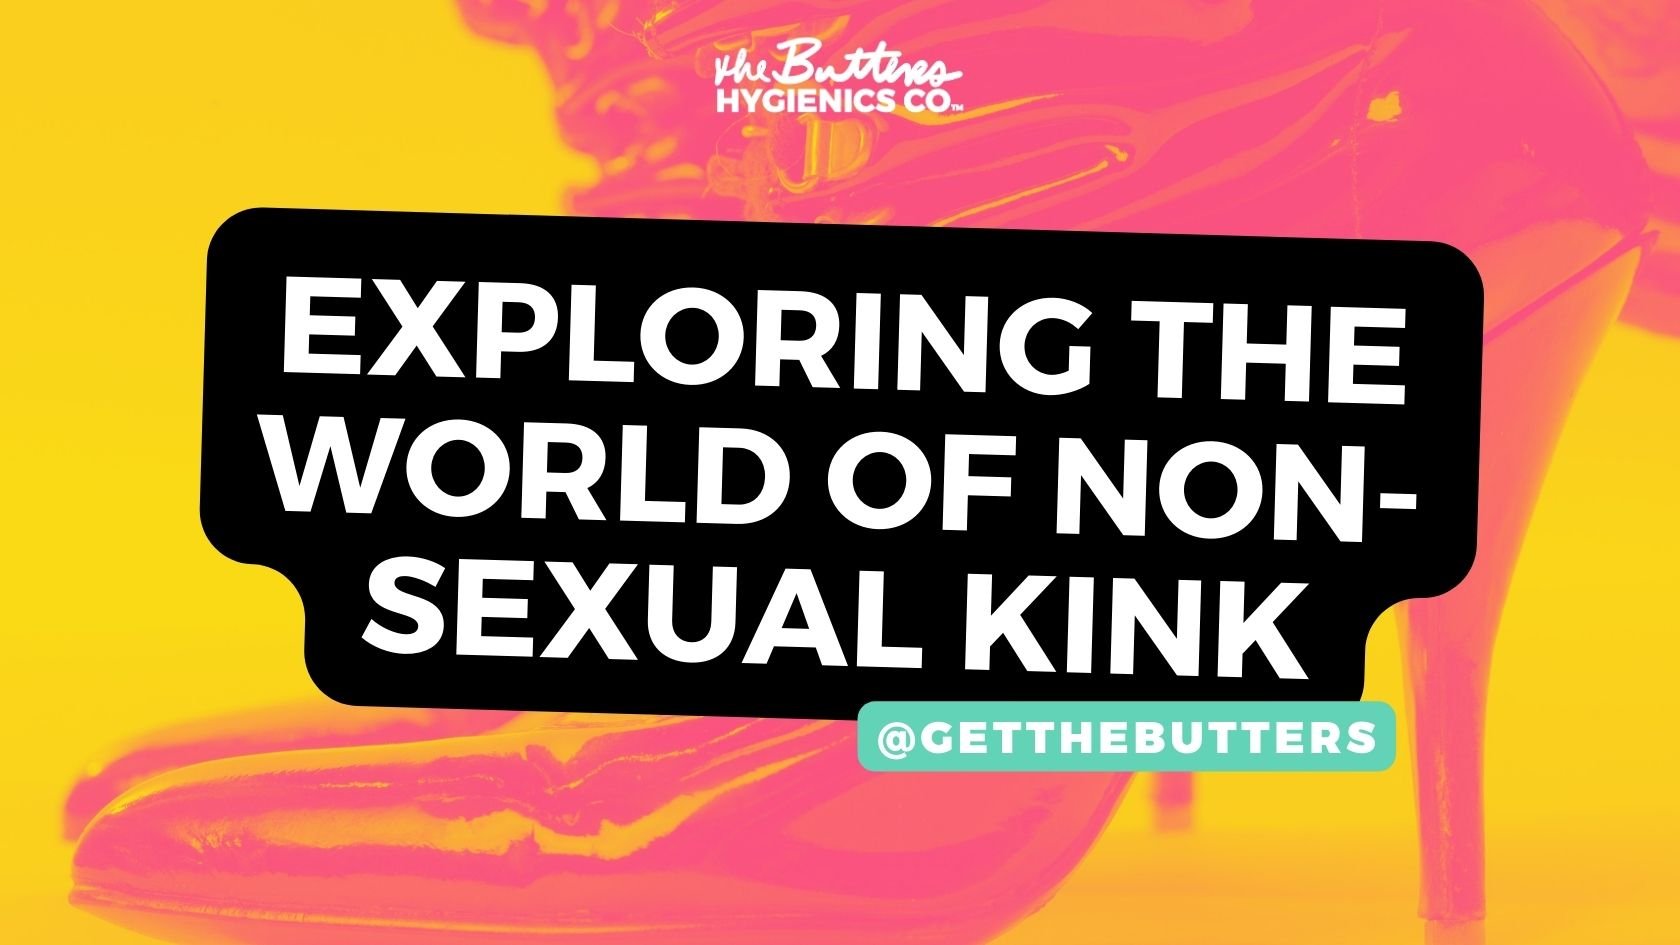 Who Says BDSM Has to Be Sexy? Exploring the World of Non-Sexual Kink — The Butters Hygienics